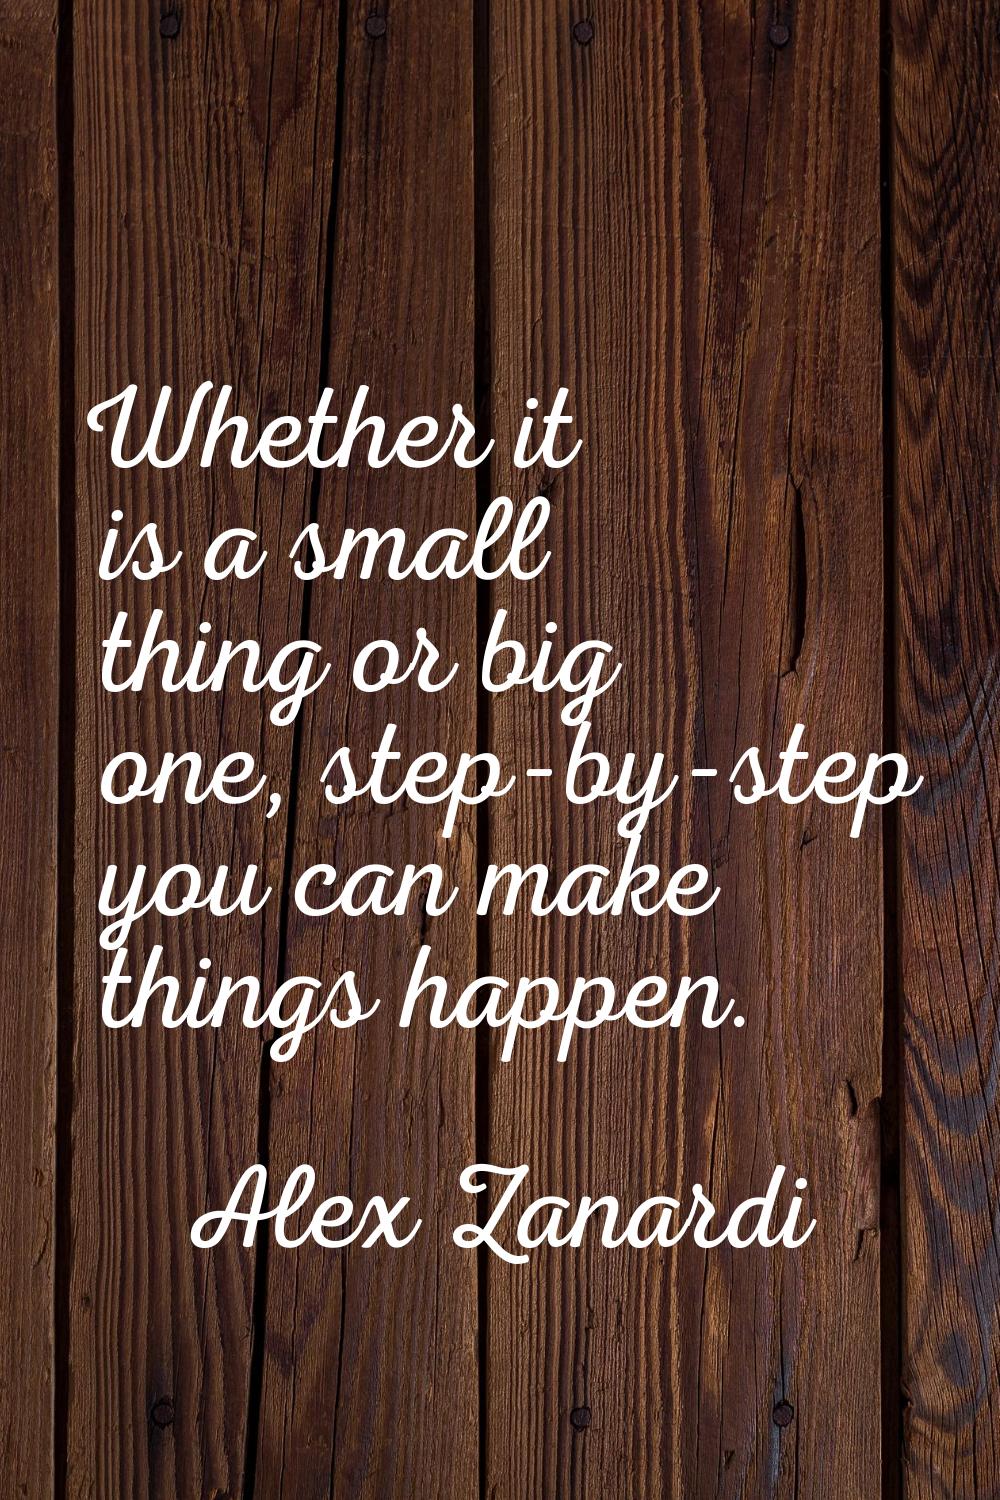 Whether it is a small thing or big one, step-by-step you can make things happen.